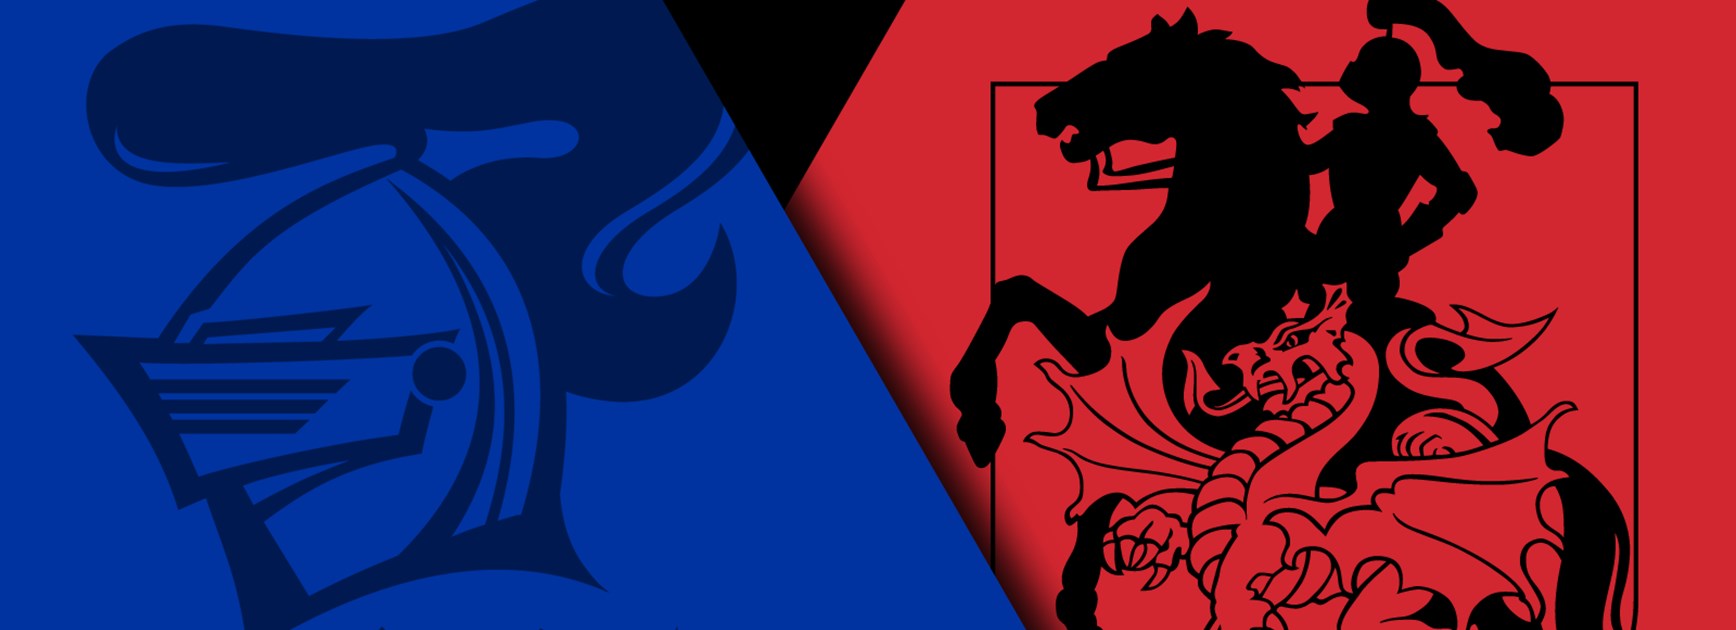 Knights-Dragons preview.